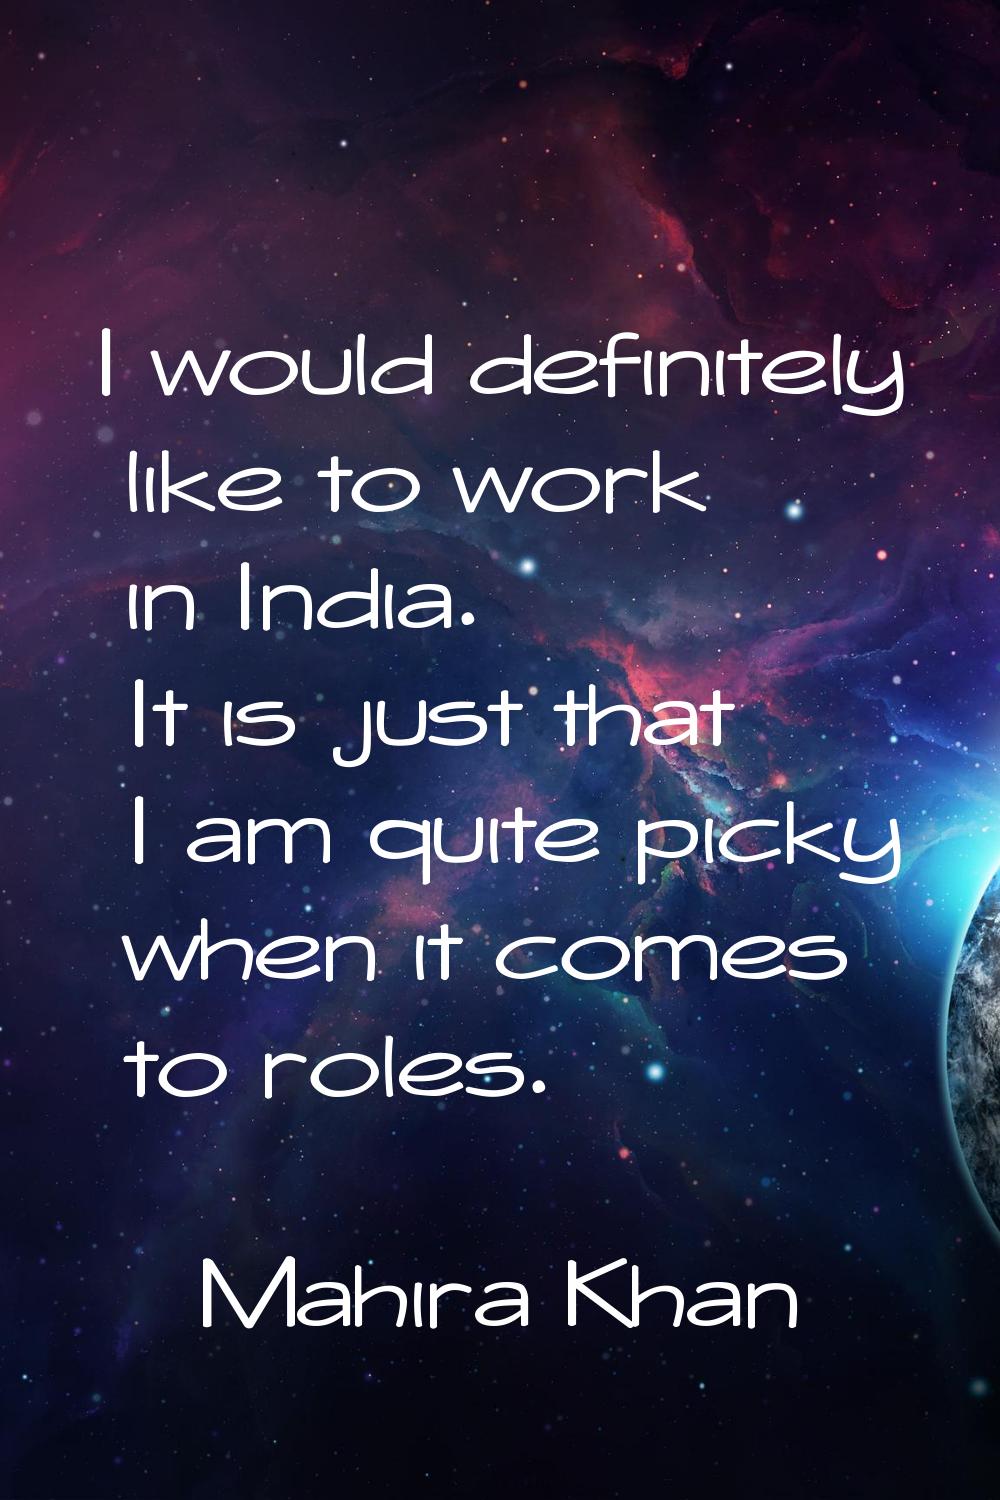 I would definitely like to work in India. It is just that I am quite picky when it comes to roles.